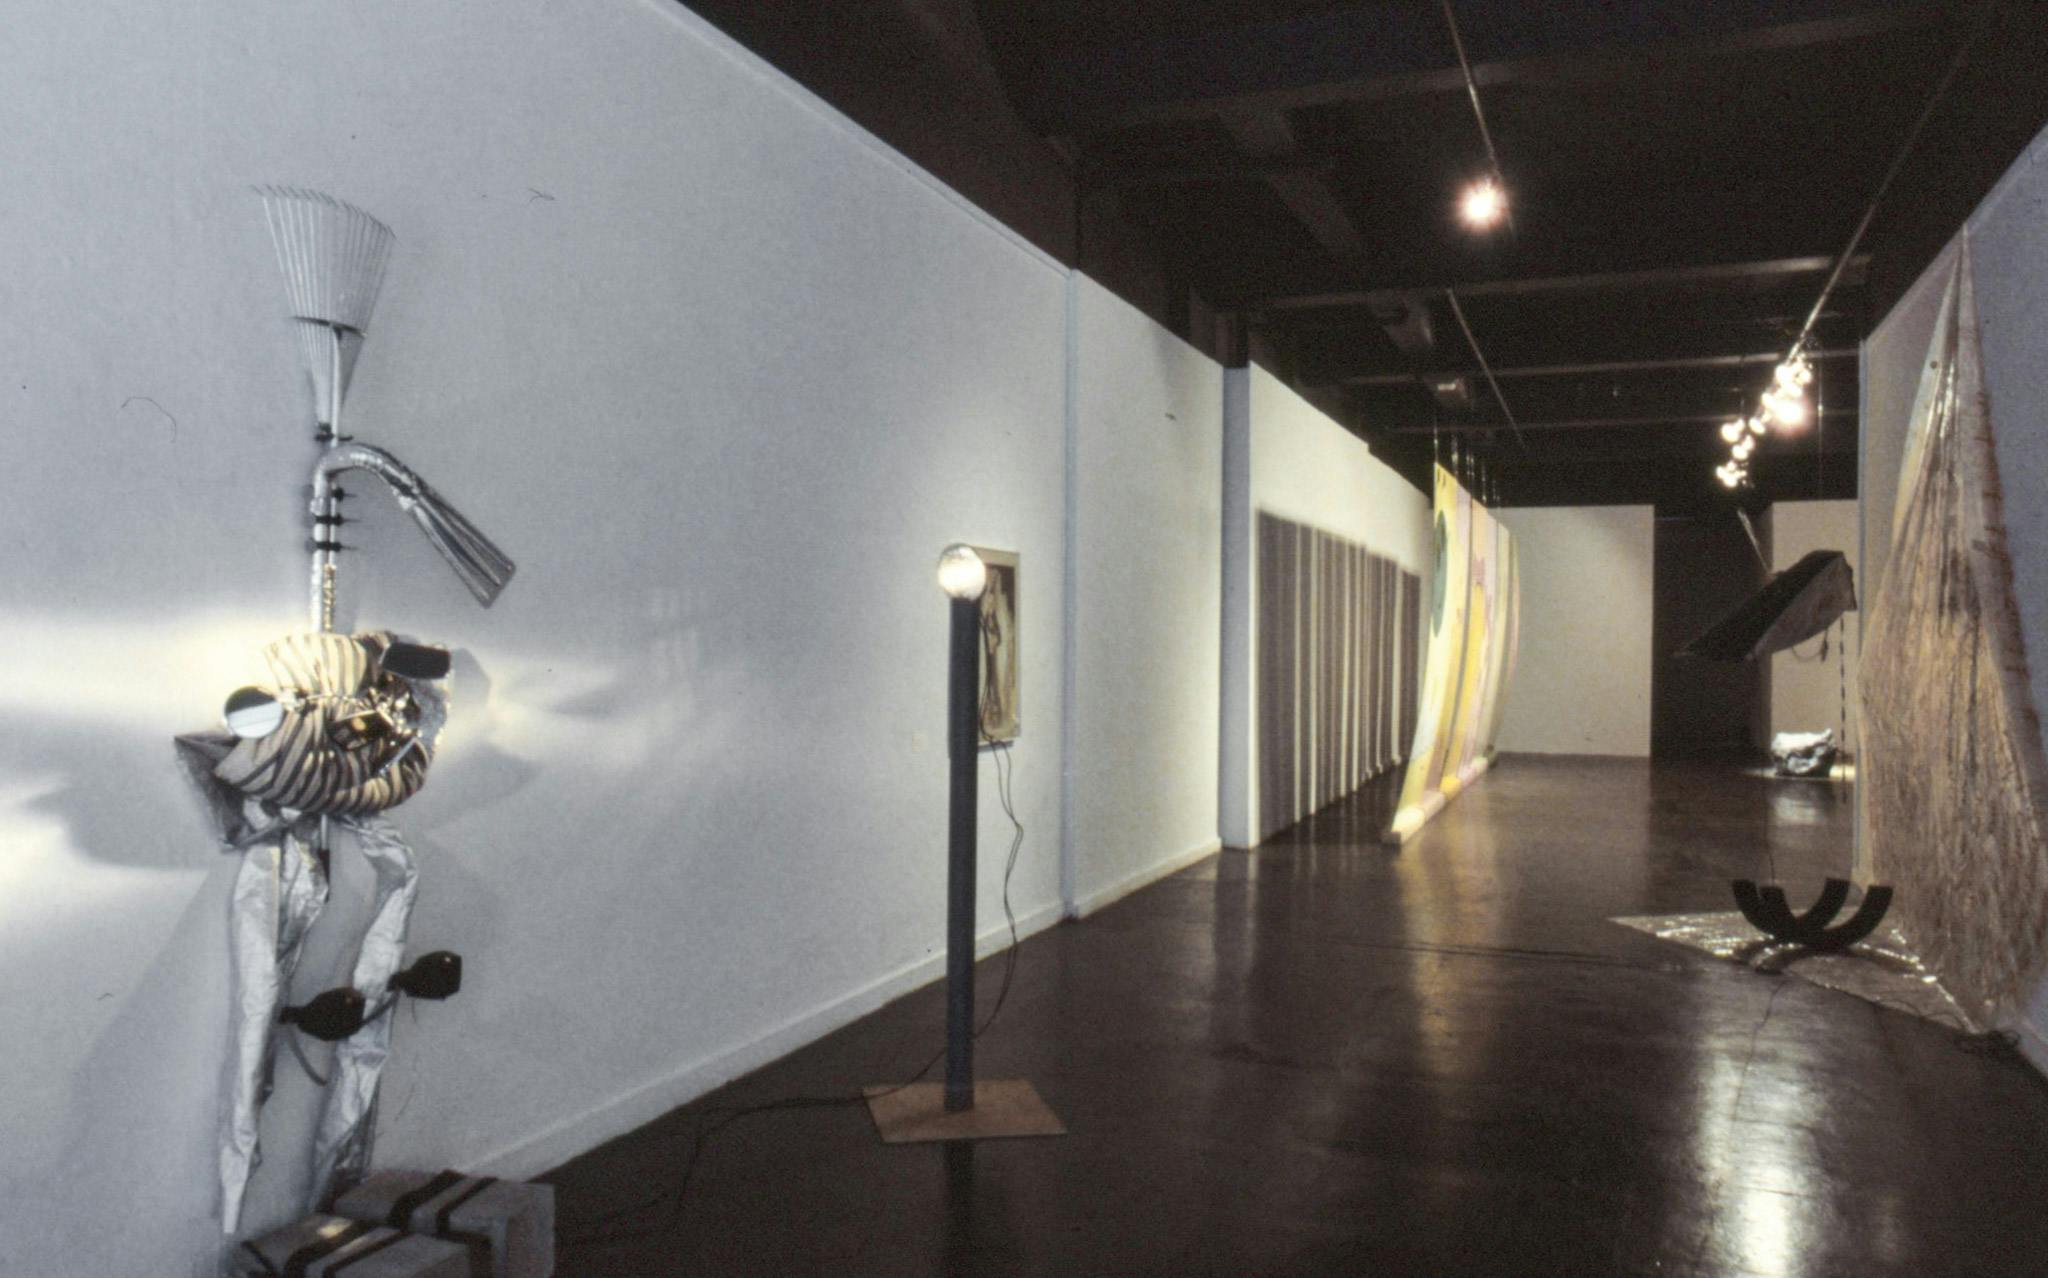 Several artworks in the ball of a gallery. The works include a sculpture with concrete, tin foil, and a metal rake; a sculpture with a lightbulb on a pole; and a painting on the wall. 